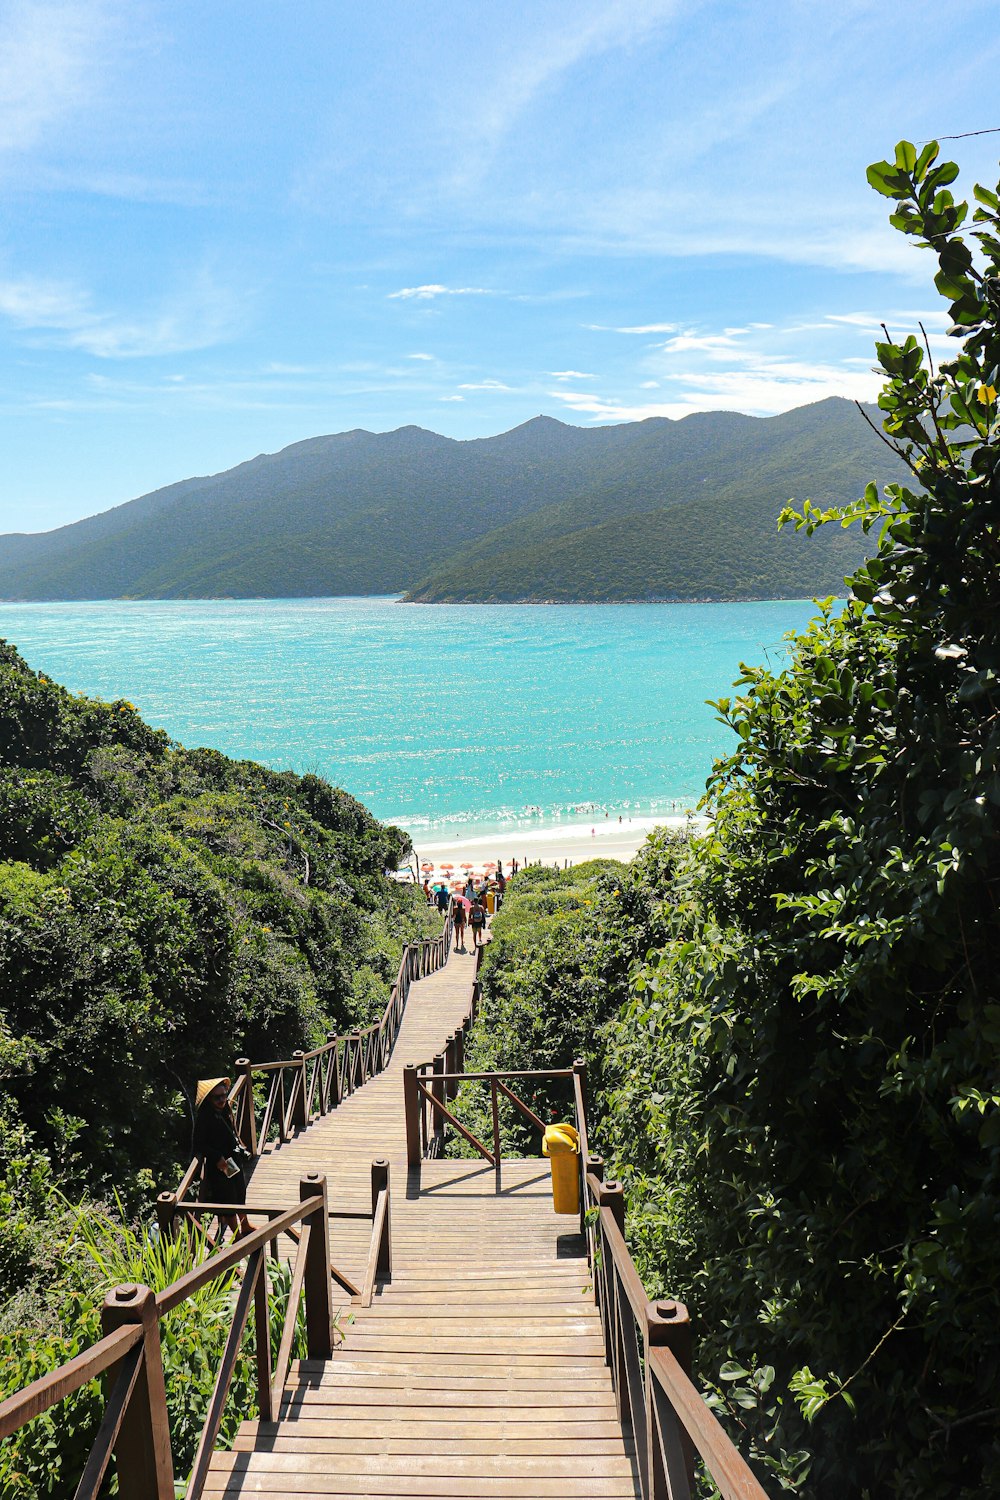 a wooden walkway leading to a beach with people walking on it